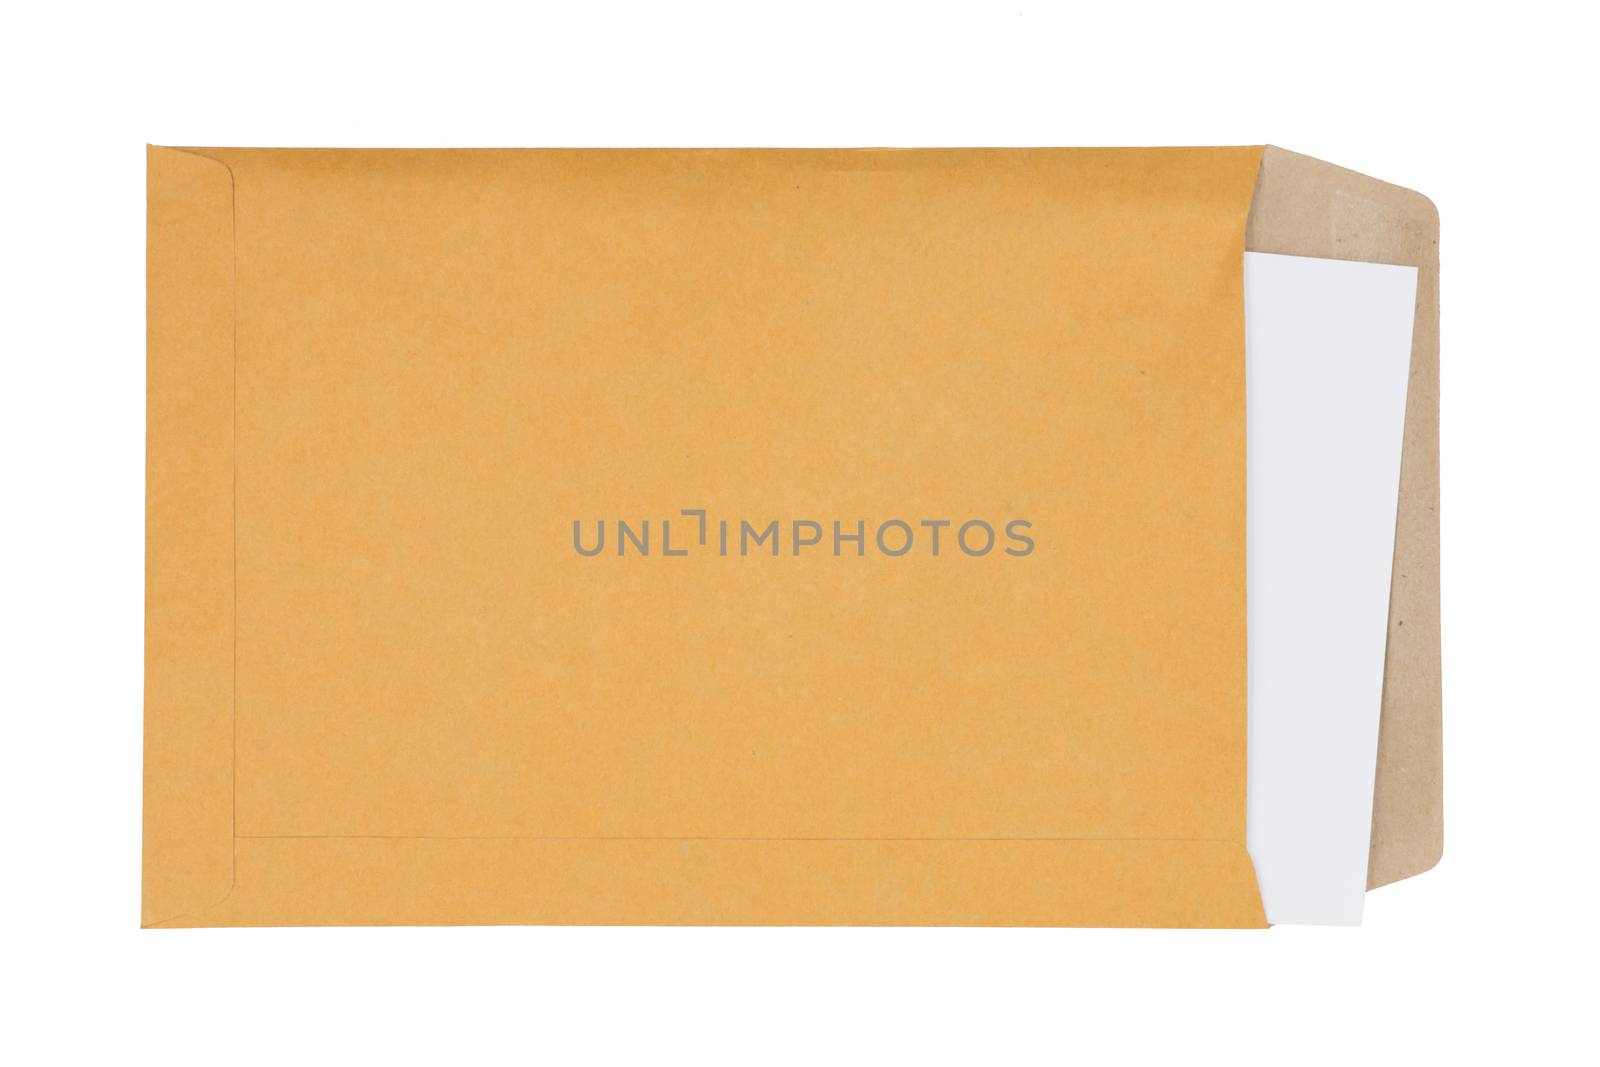 envelope with document isolated on white background.